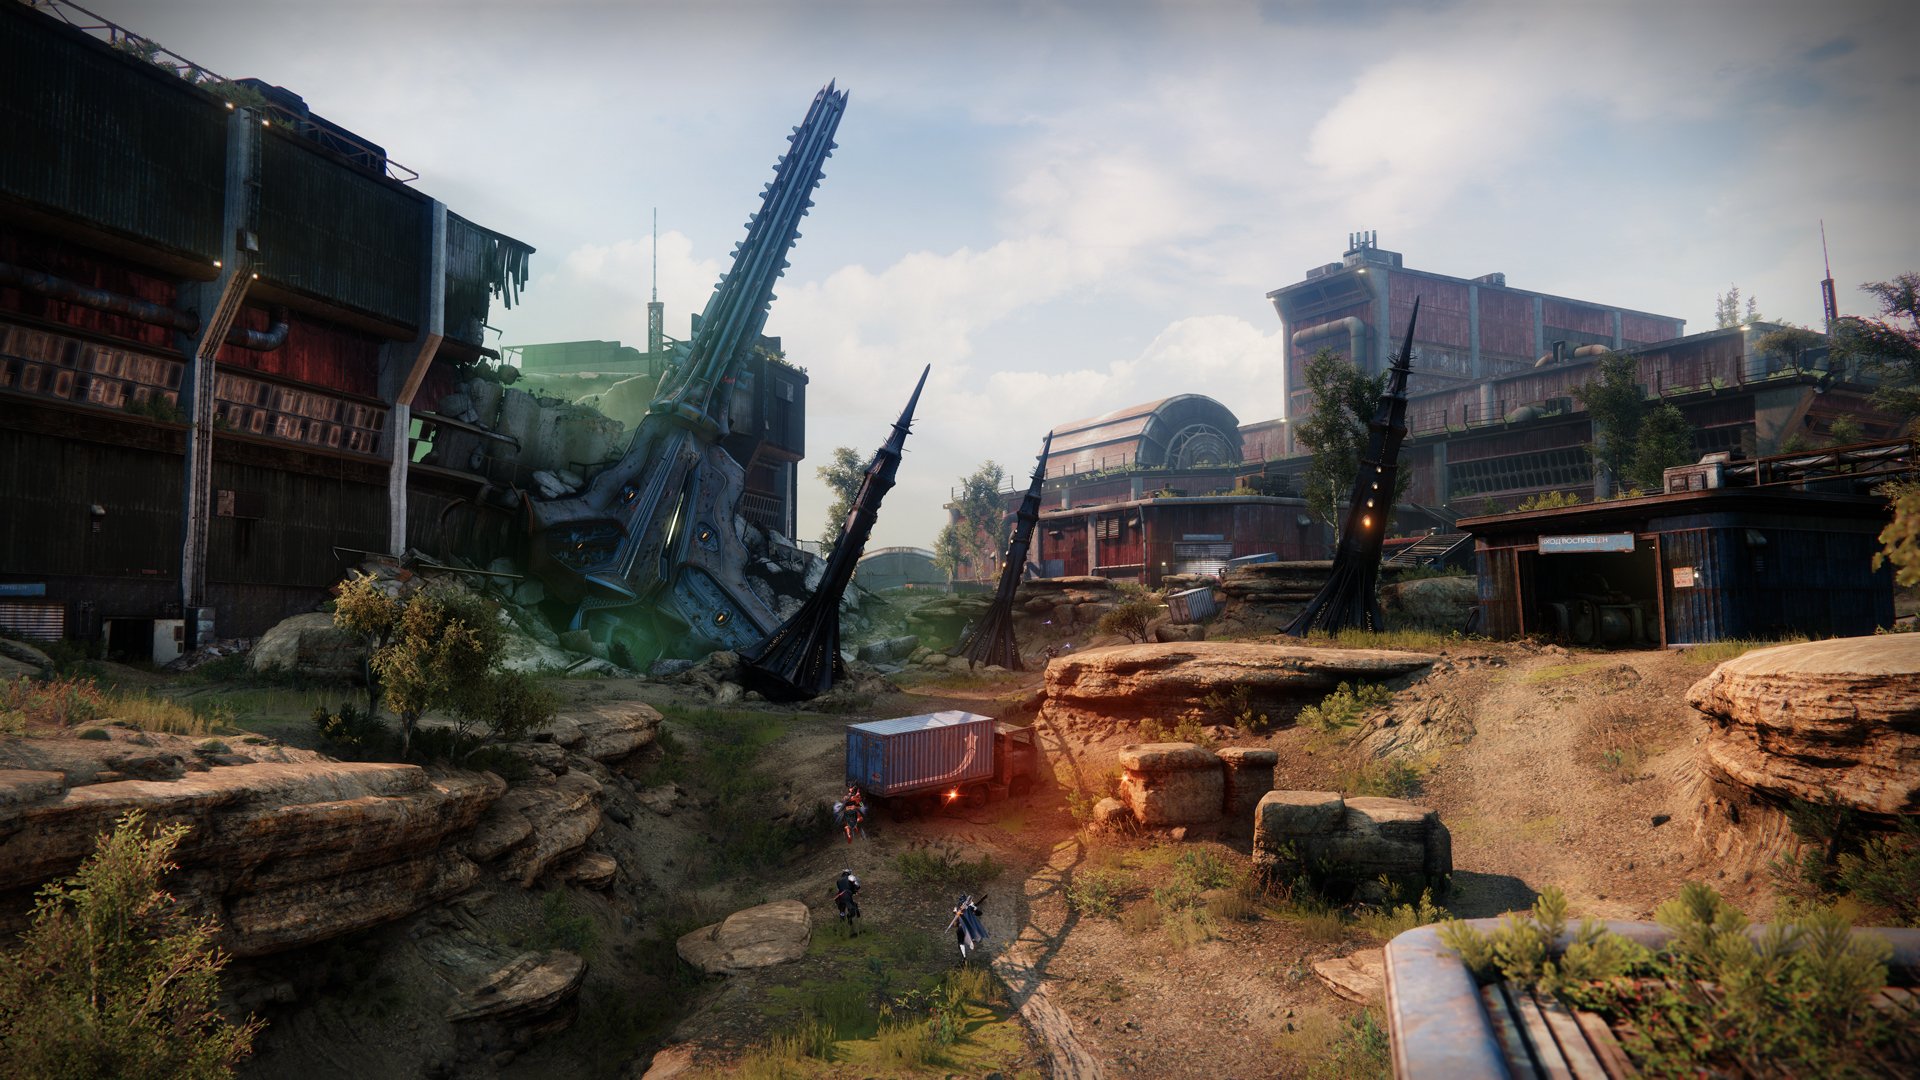 Destiny guide: Earth Cosmodrome story missions walkthough and